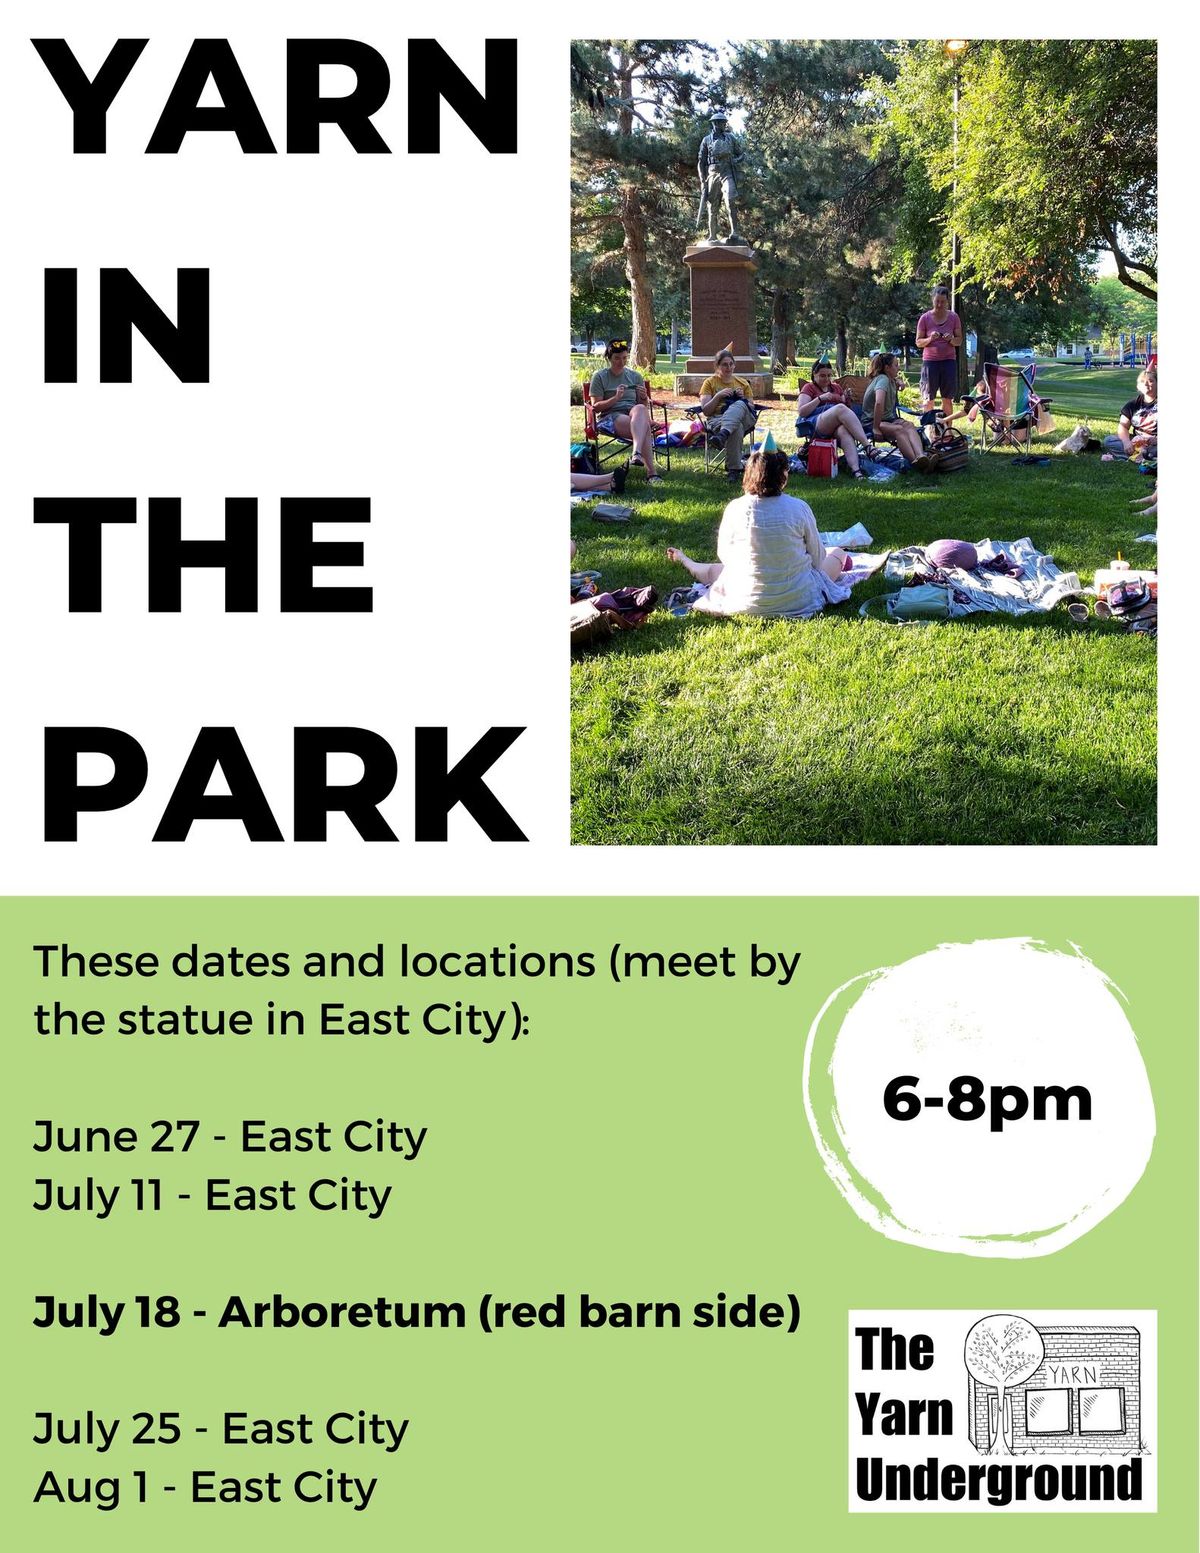 Yarn in the Park - August 1